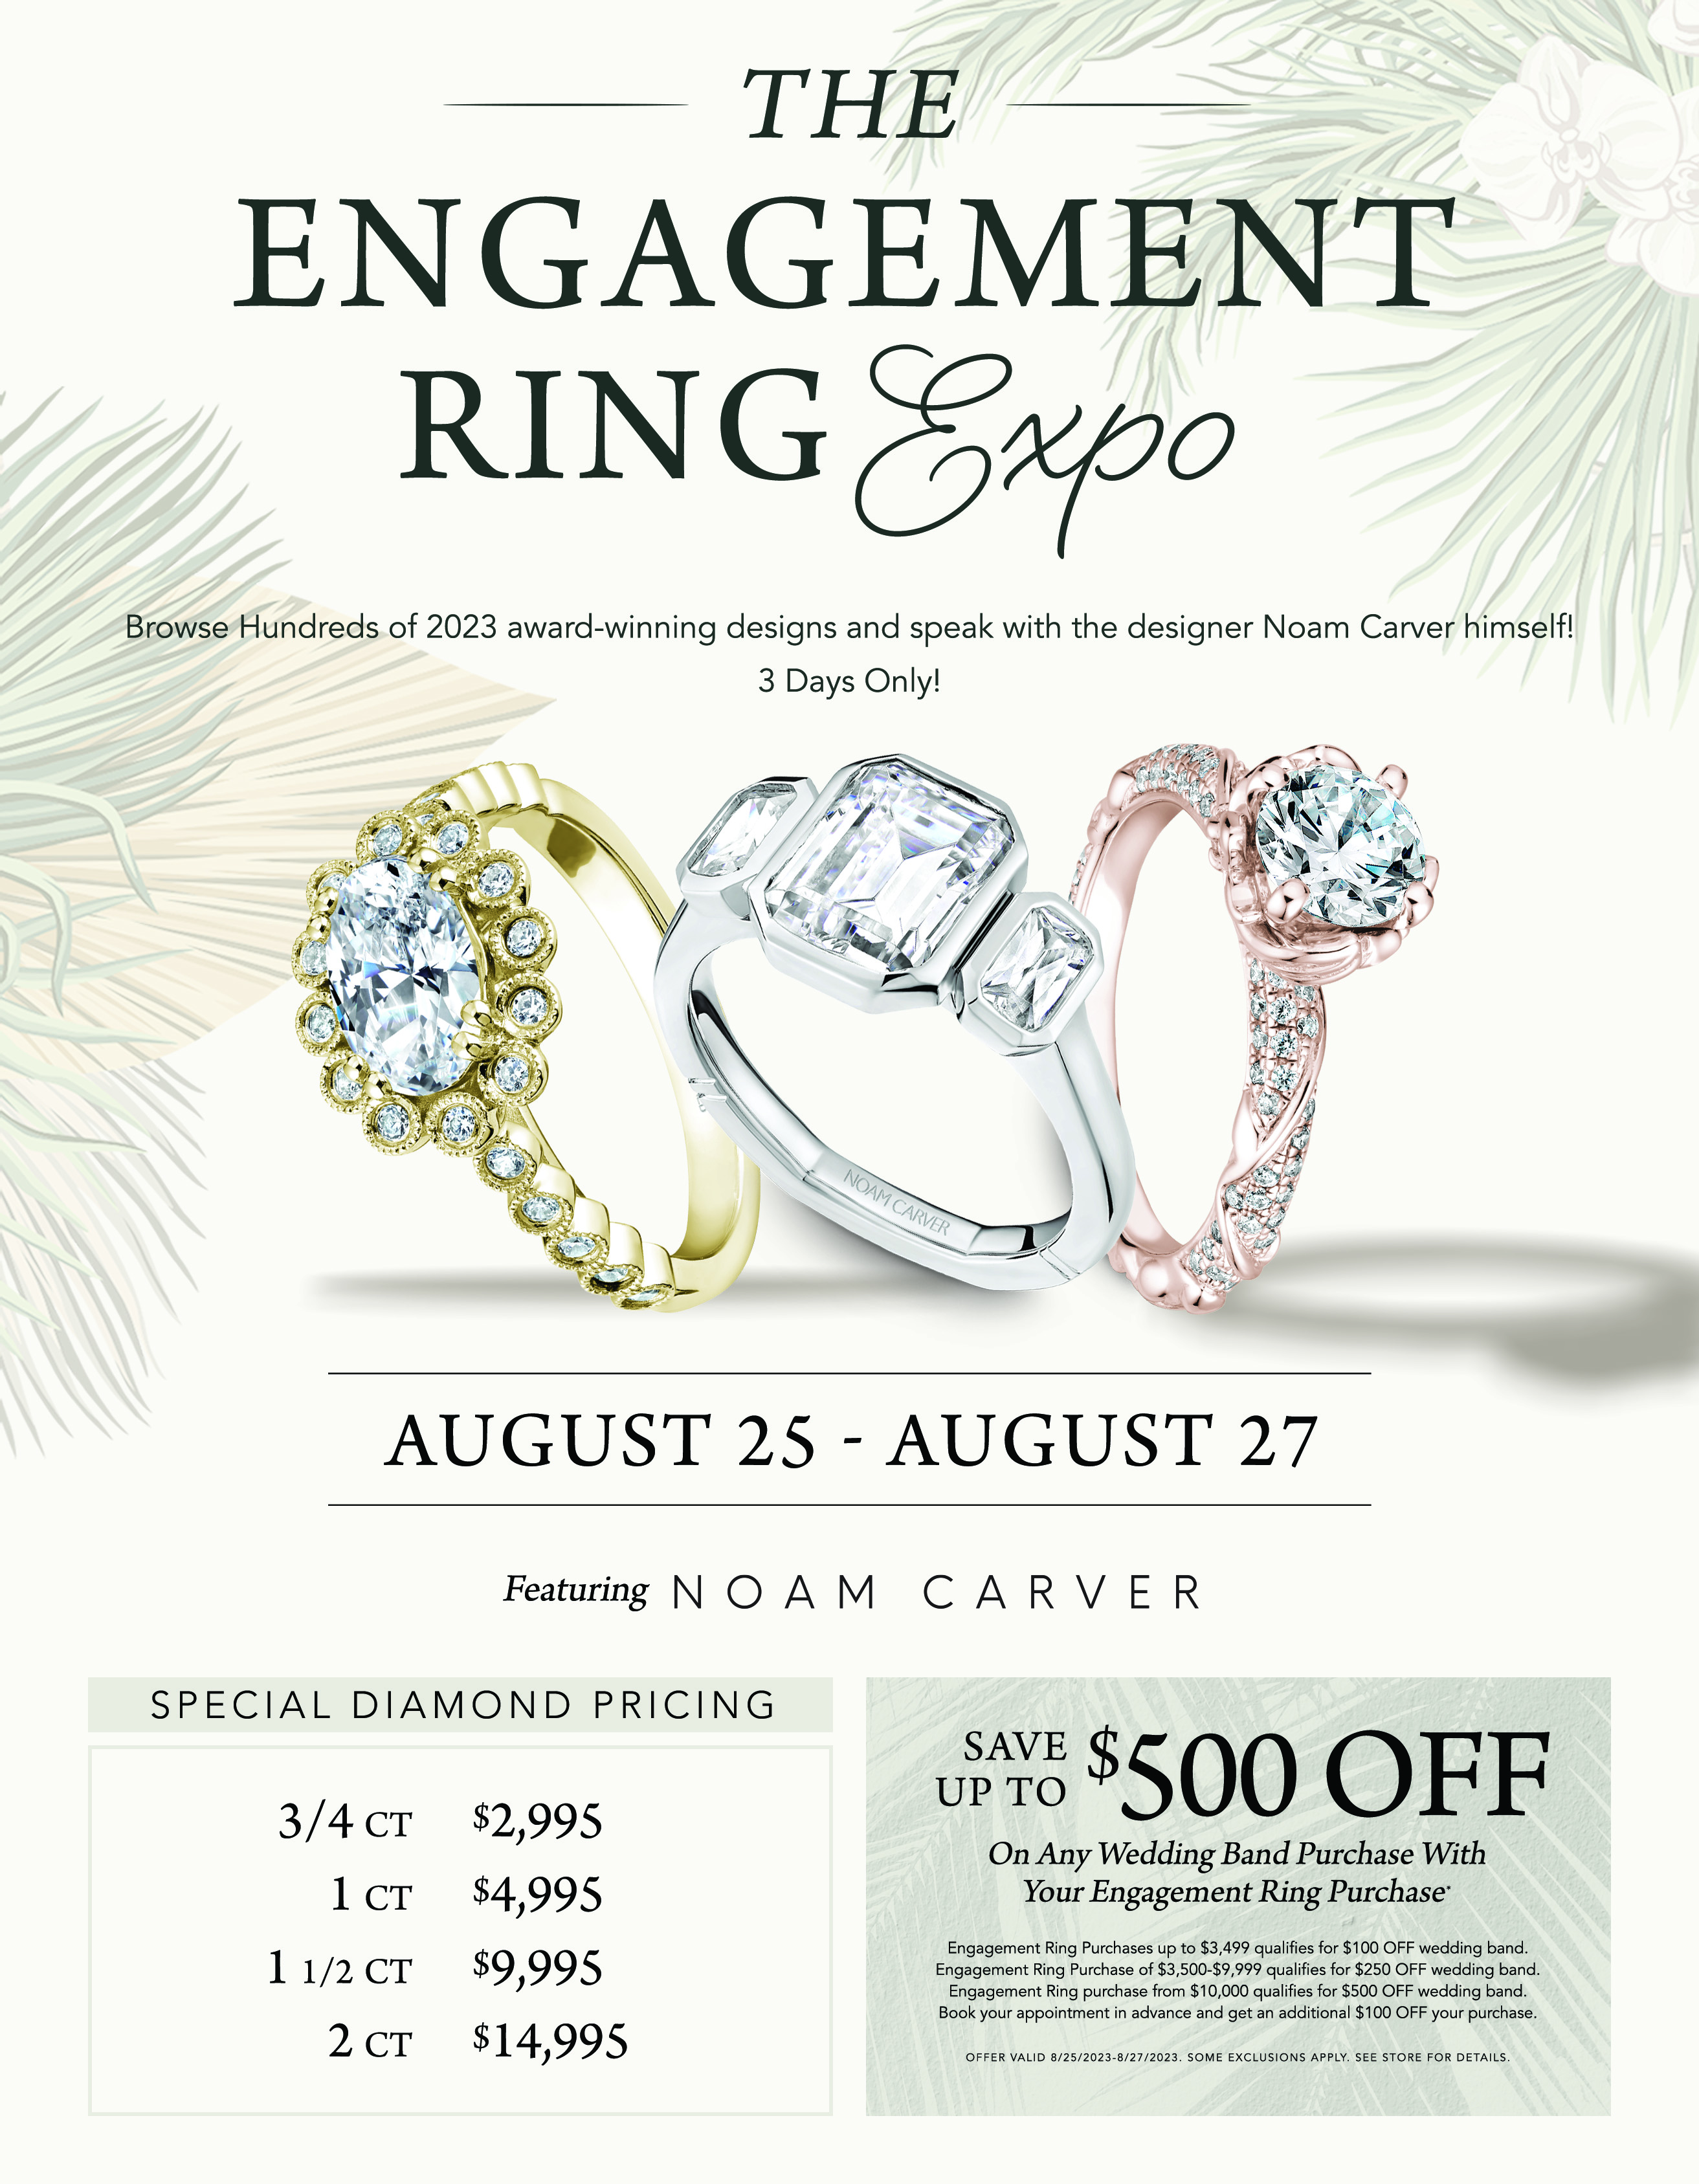 Specially priced diamonds and engagement rings at The Wedding Ring Shop August 25th - 27th in their Honolulu showroom for The Engagement Ring Expo.